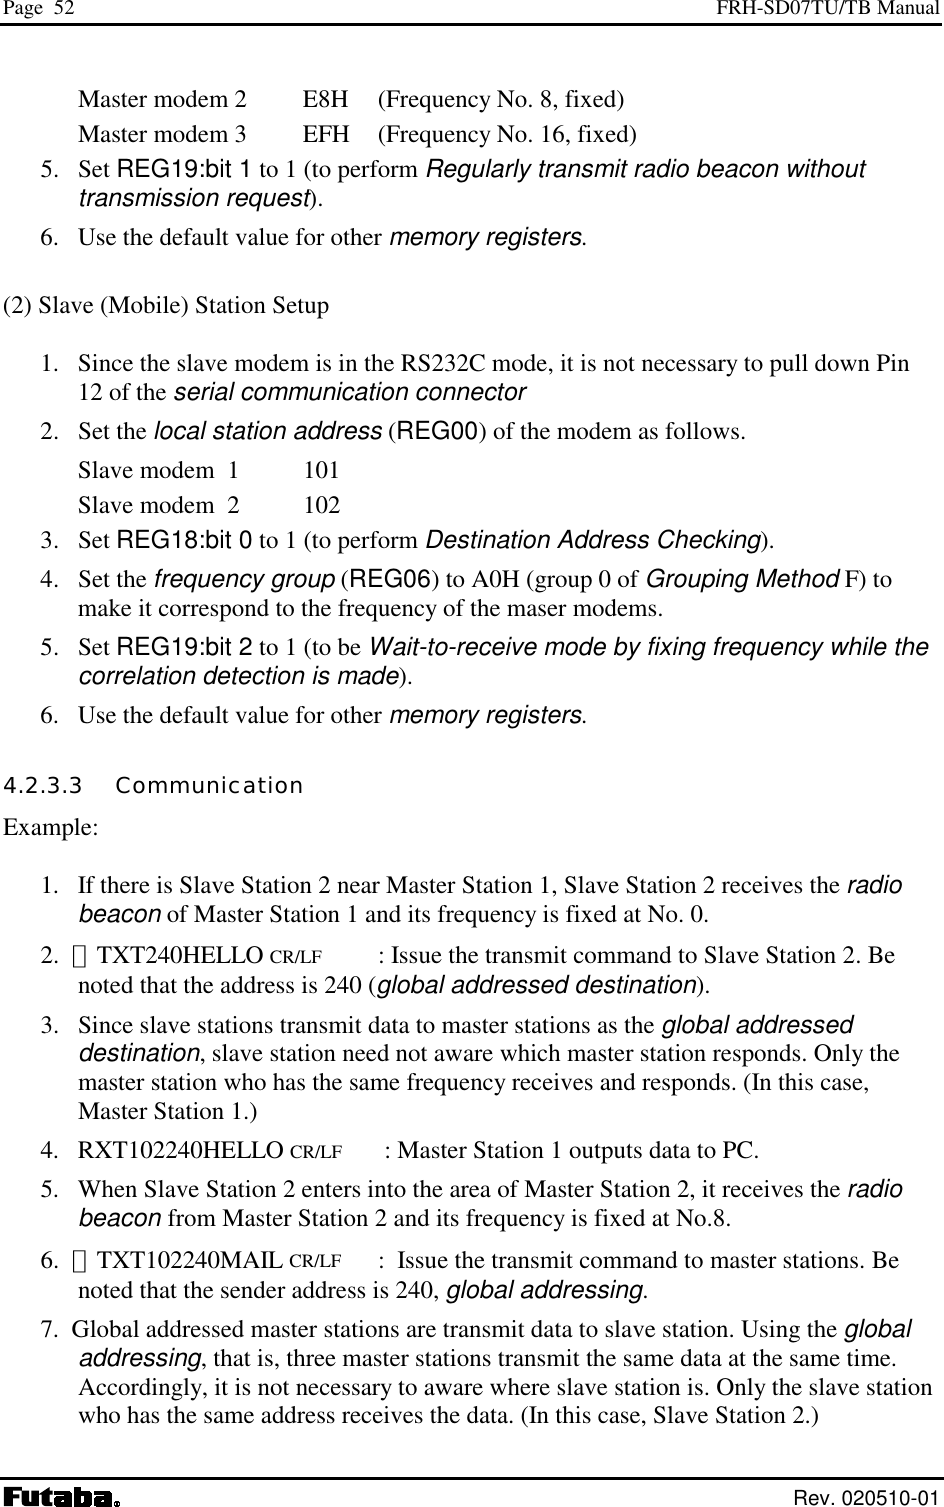 Page  52  FRH-SD07TU/TB Manual  Rev. 020510-01 Master modem 2    E8H  (Frequency No. 8, fixed) Master modem 3    EFH  (Frequency No. 16, fixed) 5. Set REG19:bit 1 to 1 (to perform Regularly transmit radio beacon without transmission request). 6.  Use the default value for other memory registers.  (2) Slave (Mobile) Station Setup  1.  Since the slave modem is in the RS232C mode, it is not necessary to pull down Pin 12 of the serial communication connector 2. Set the local station address (REG00) of the modem as follows. Slave modem  1    101 Slave modem  2    102 3. Set REG18:bit 0 to 1 (to perform Destination Address Checking).   4. Set the frequency group (REG06) to A0H (group 0 of Grouping Method F) to make it correspond to the frequency of the maser modems.  5. Set REG19:bit 2 to 1 (to be Wait-to-receive mode by fixing frequency while the correlation detection is made).  6.  Use the default value for other memory registers. 4.2.3.3   Communication Example:  1.   If there is Slave Station 2 near Master Station 1, Slave Station 2 receives the radio beacon of Master Station 1 and its frequency is fixed at No. 0. 2.  ＠TXT240HELLO CR/LF  : Issue the transmit command to Slave Station 2. Be noted that the address is 240 (global addressed destination). 3.   Since slave stations transmit data to master stations as the global addressed destination, slave station need not aware which master station responds. Only the master station who has the same frequency receives and responds. (In this case, Master Station 1.)  4.   RXT102240HELLO CR/LF    : Master Station 1 outputs data to PC. 5.   When Slave Station 2 enters into the area of Master Station 2, it receives the radio beacon from Master Station 2 and its frequency is fixed at No.8.  6.  ＠TXT102240MAIL CR/LF :  Issue the transmit command to master stations. Be noted that the sender address is 240, global addressing. 7.  Global addressed master stations are transmit data to slave station. Using the global addressing, that is, three master stations transmit the same data at the same time. Accordingly, it is not necessary to aware where slave station is. Only the slave station who has the same address receives the data. (In this case, Slave Station 2.) 